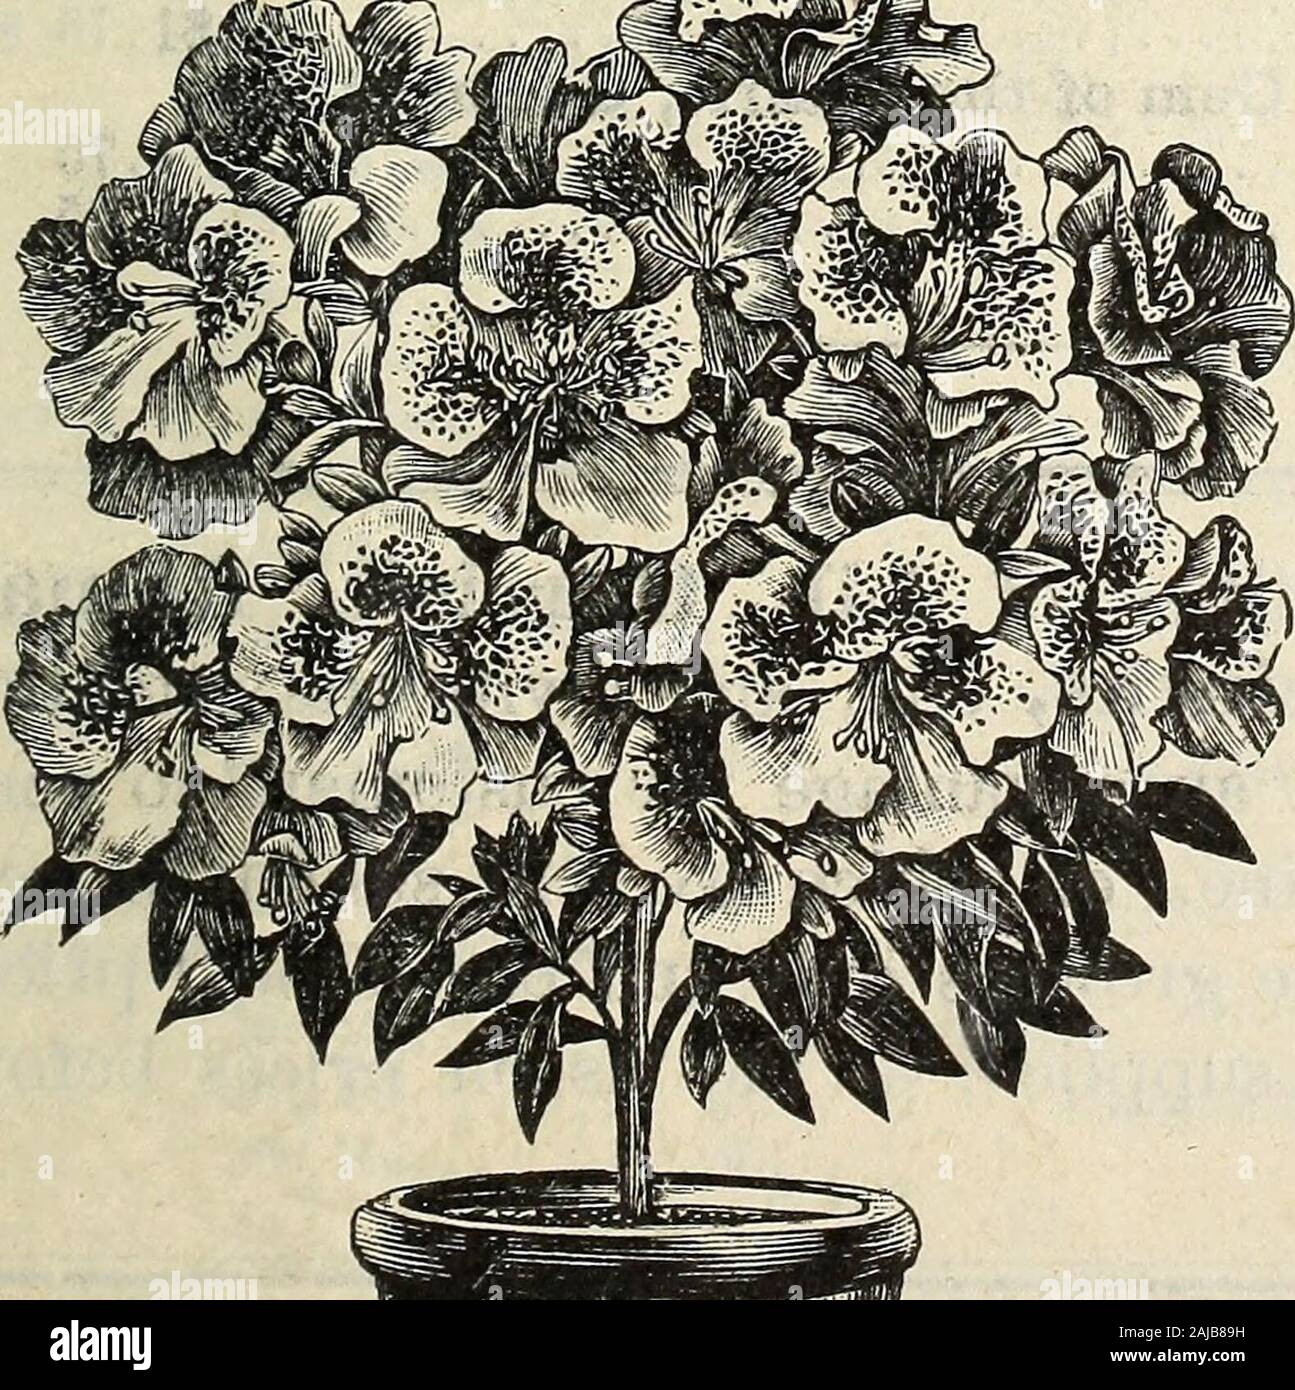 Barnard's wholesale florists' list of seeds bulbs sundries, etc : spring edition 1895 . arly fiowering variety; 3 years old 4.75 37.50 FLAMMULA. White; fragrant 4.75 37.50 HENRYI. Large, finely formed white flowers; extra strong 4.75 37.50 LAWSONIANA. Pvosy purple; 3 years old 4.75 37.50 MRS. BATEMANN. Pale lavender; fine 4.50SIEBOLDI. Lavender color; extra strong 4.50LANUGINOSA CANDIDA. Tinted grayish white; fine; 3 years old 6.00 AMPELOPSIS VEITCHI (Boston Ivy.) Extra strong 1.75 12.50 ARISTOLOCHIA SIPHO (Dutchmans Pipe.) Fine climber; 8 to 10 feet; strong plants 5.00 HYDRANGEA P. GRANDIFLOR Stock Photo